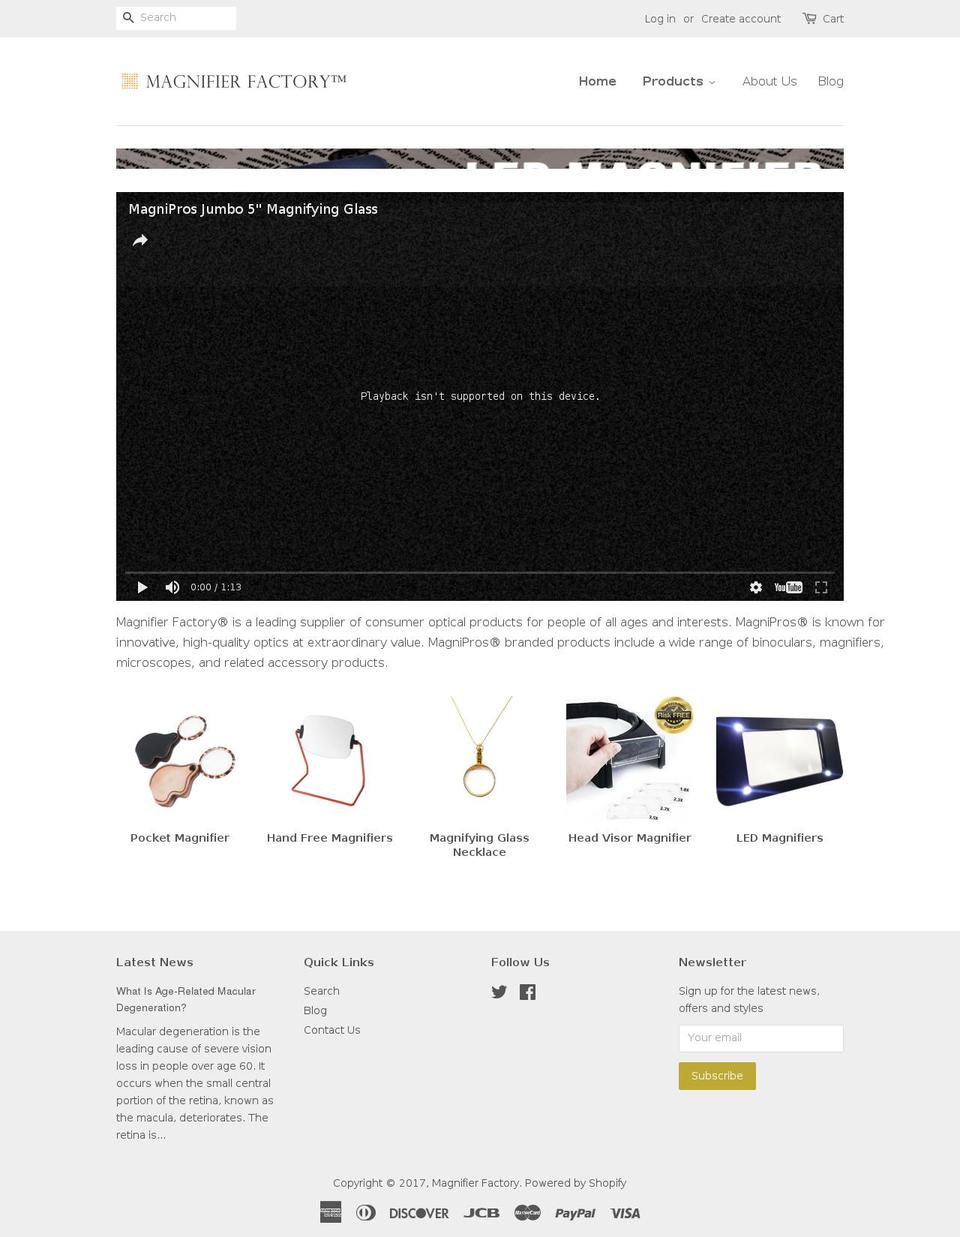 NEW Shopify theme site example magnifierfactory.com